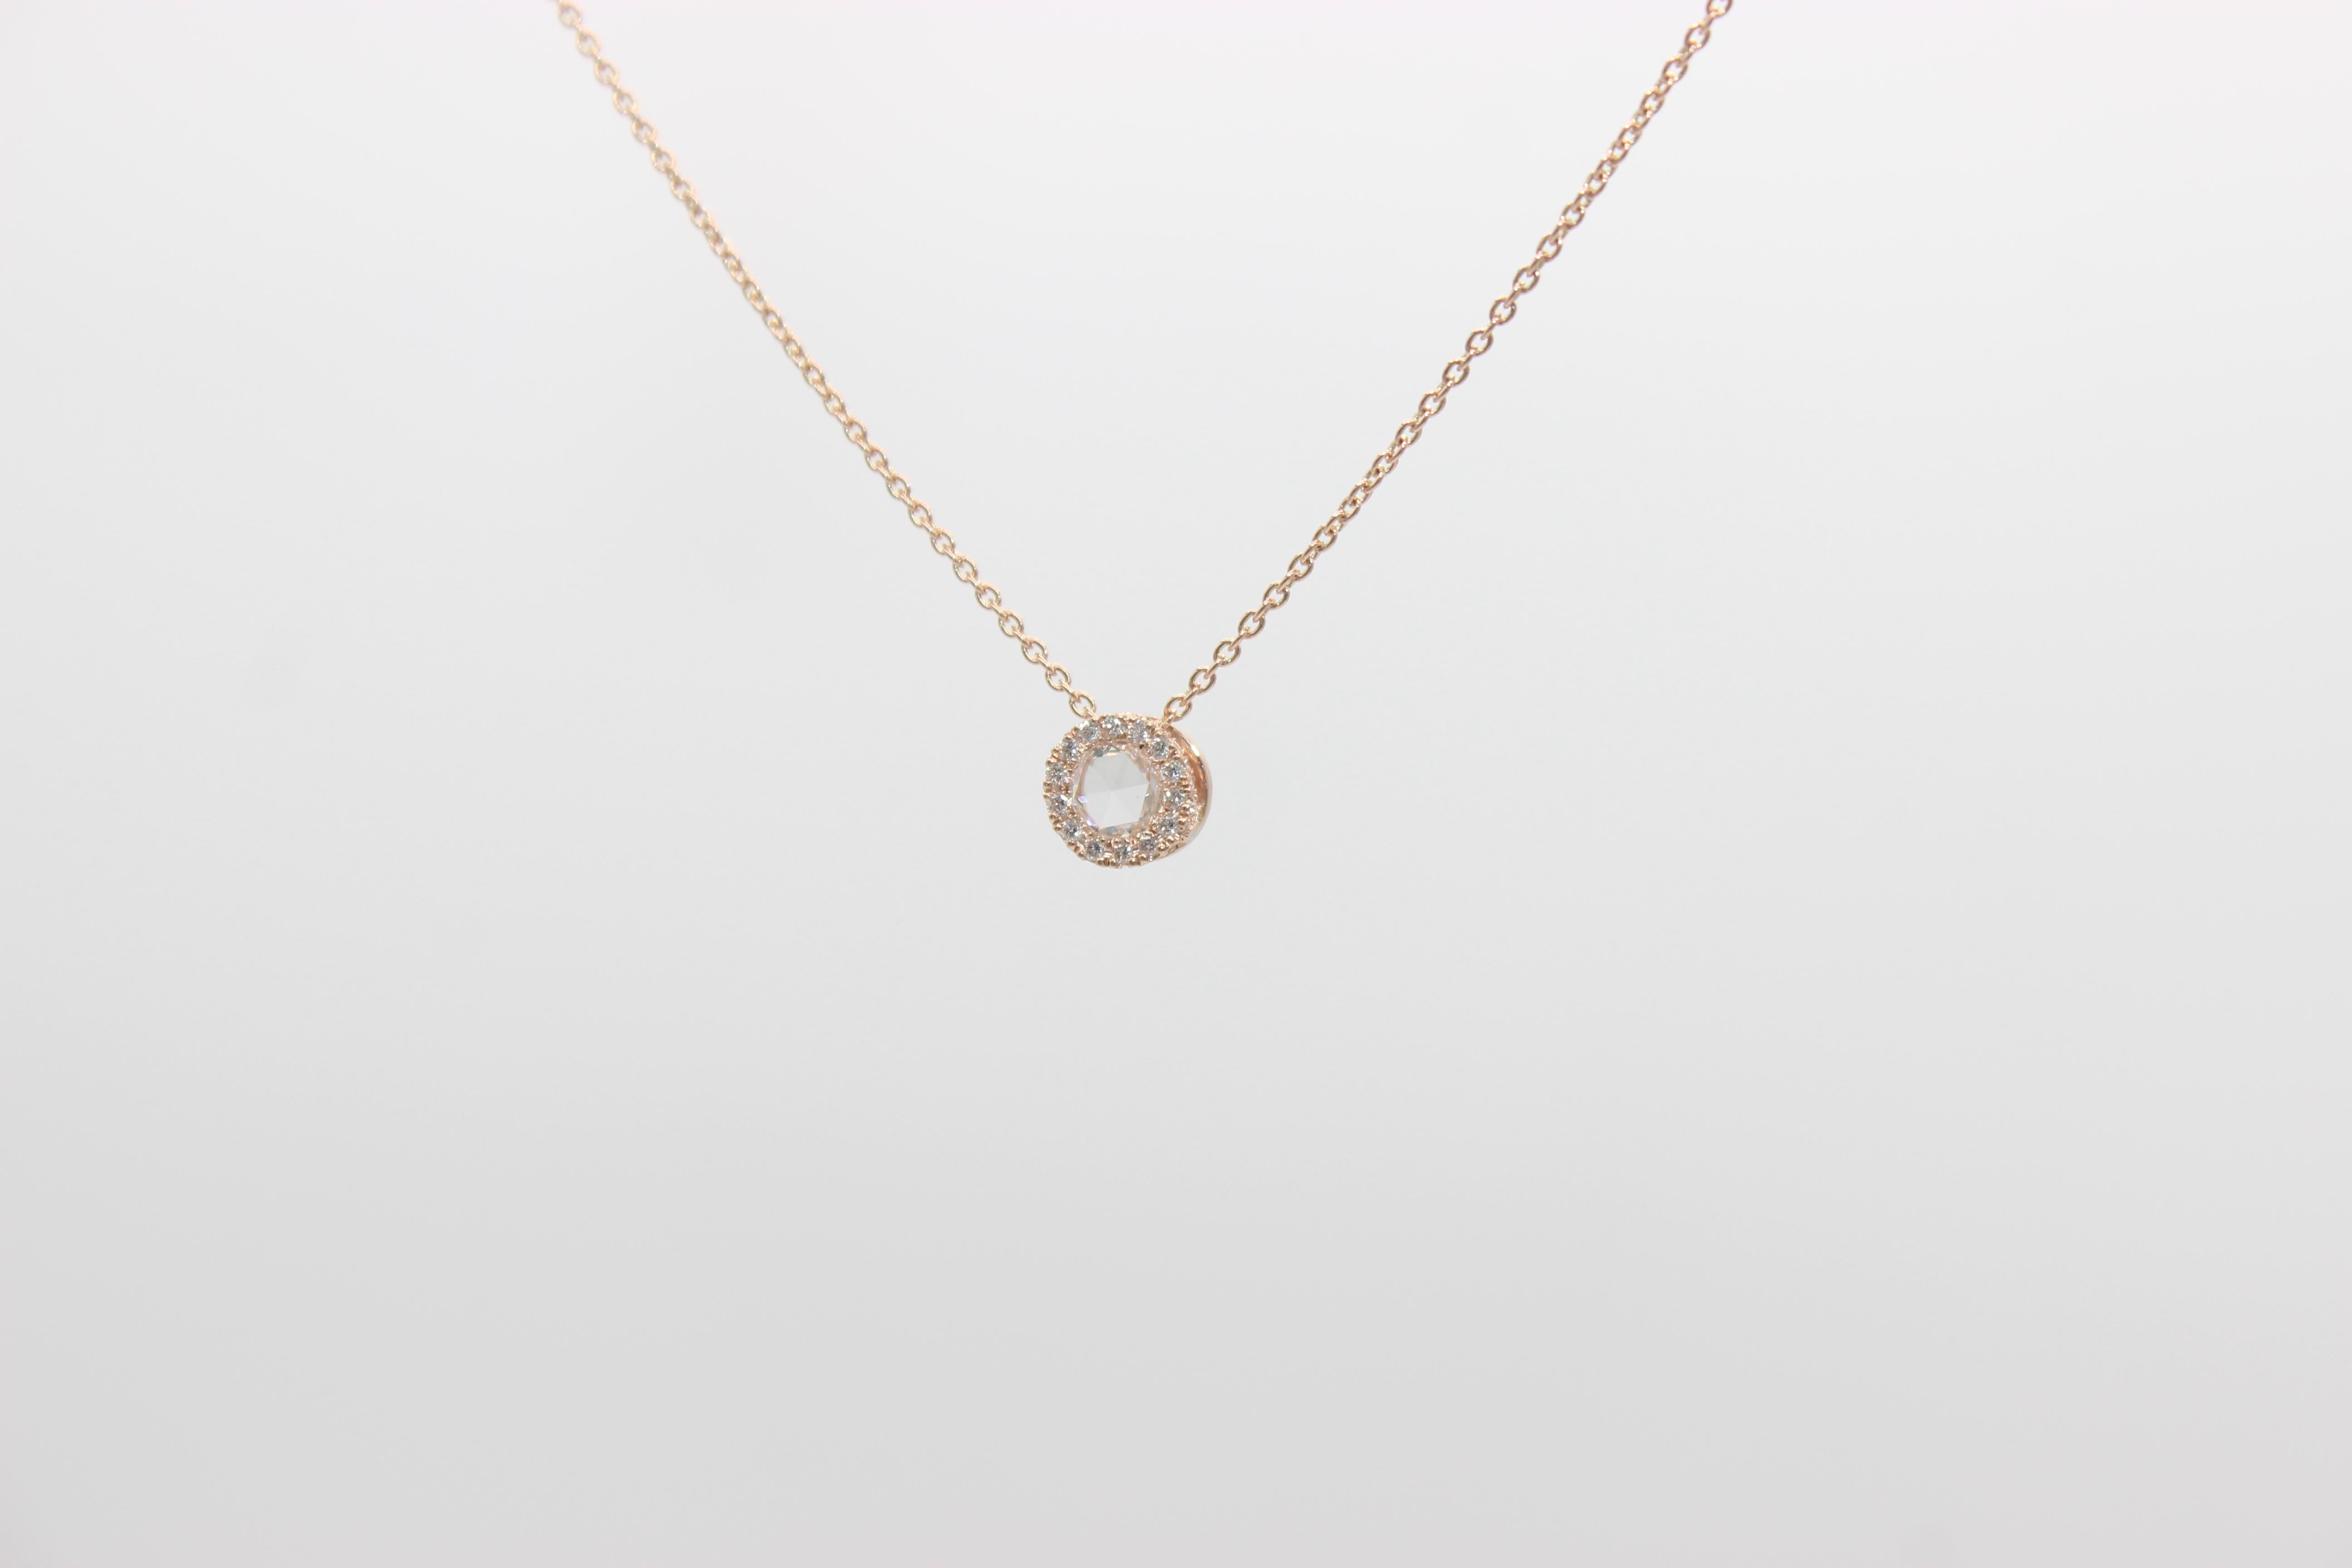 Panim 0.22 Rosecut DropPendant Necklace in 18K Rose Gold

The pristine 3mm 0.10 carat rose-cut diamond enclosed in a row of delicate micro-pave set brilliant cut diamonds can be worn alone, or gradually collected and stacked together over